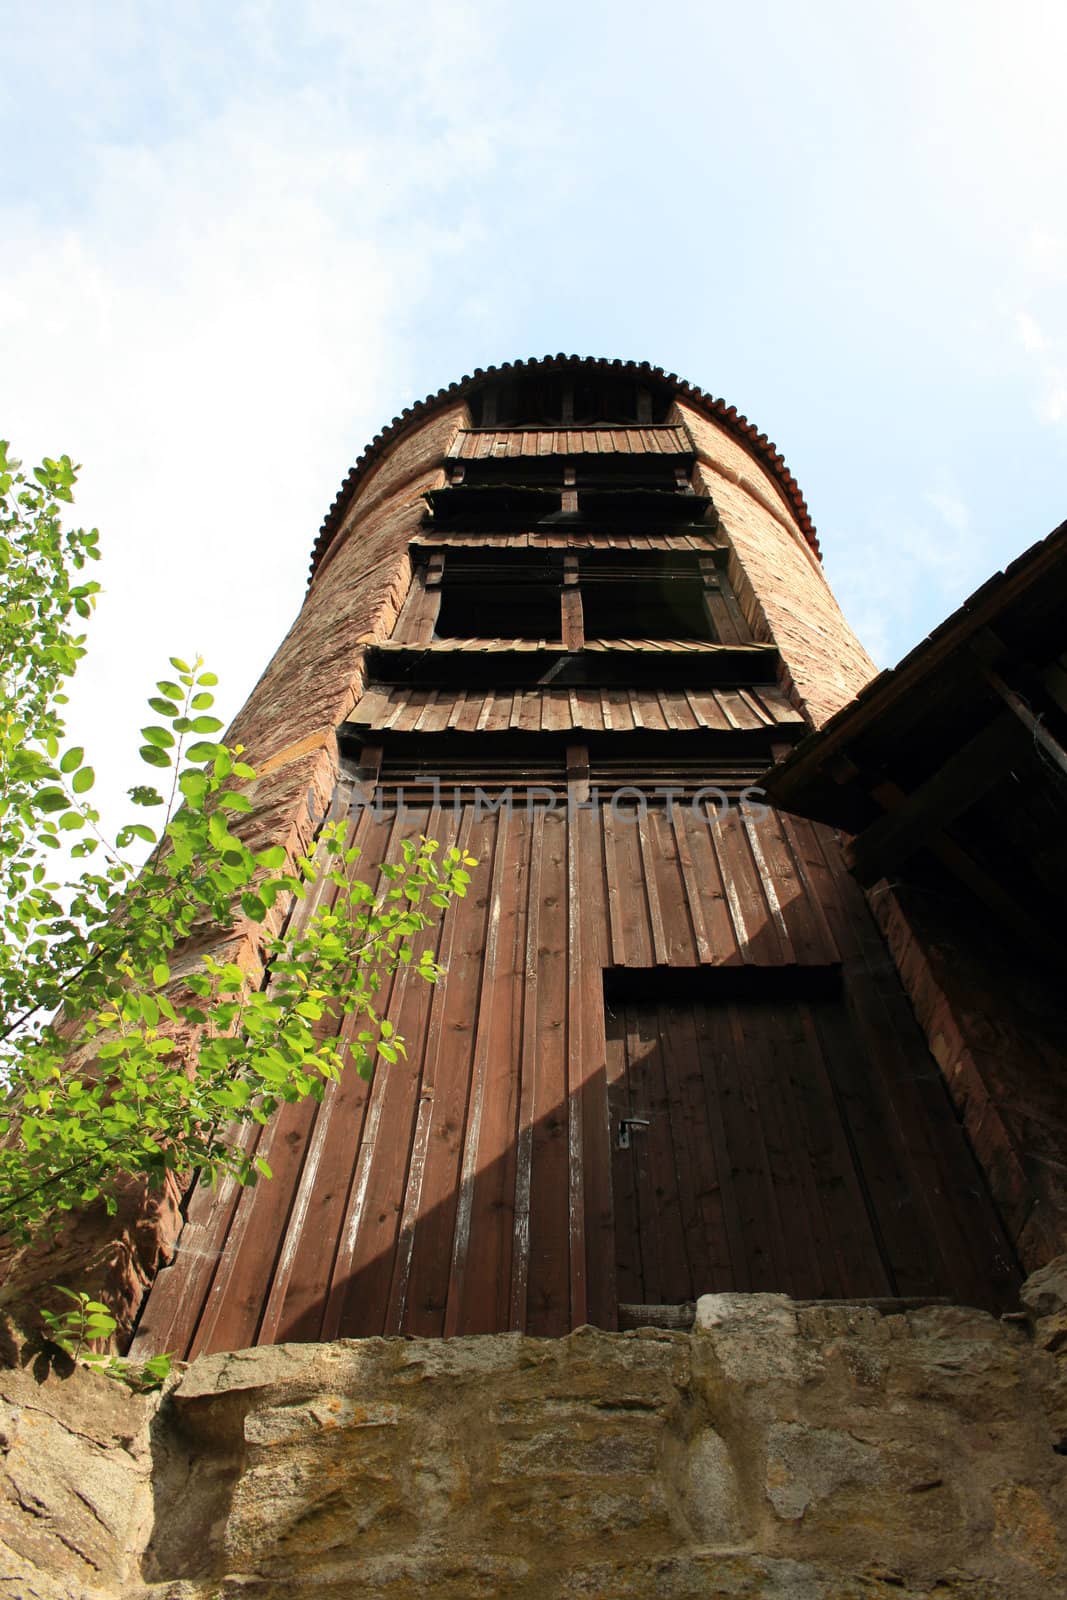 this image shows a old tower